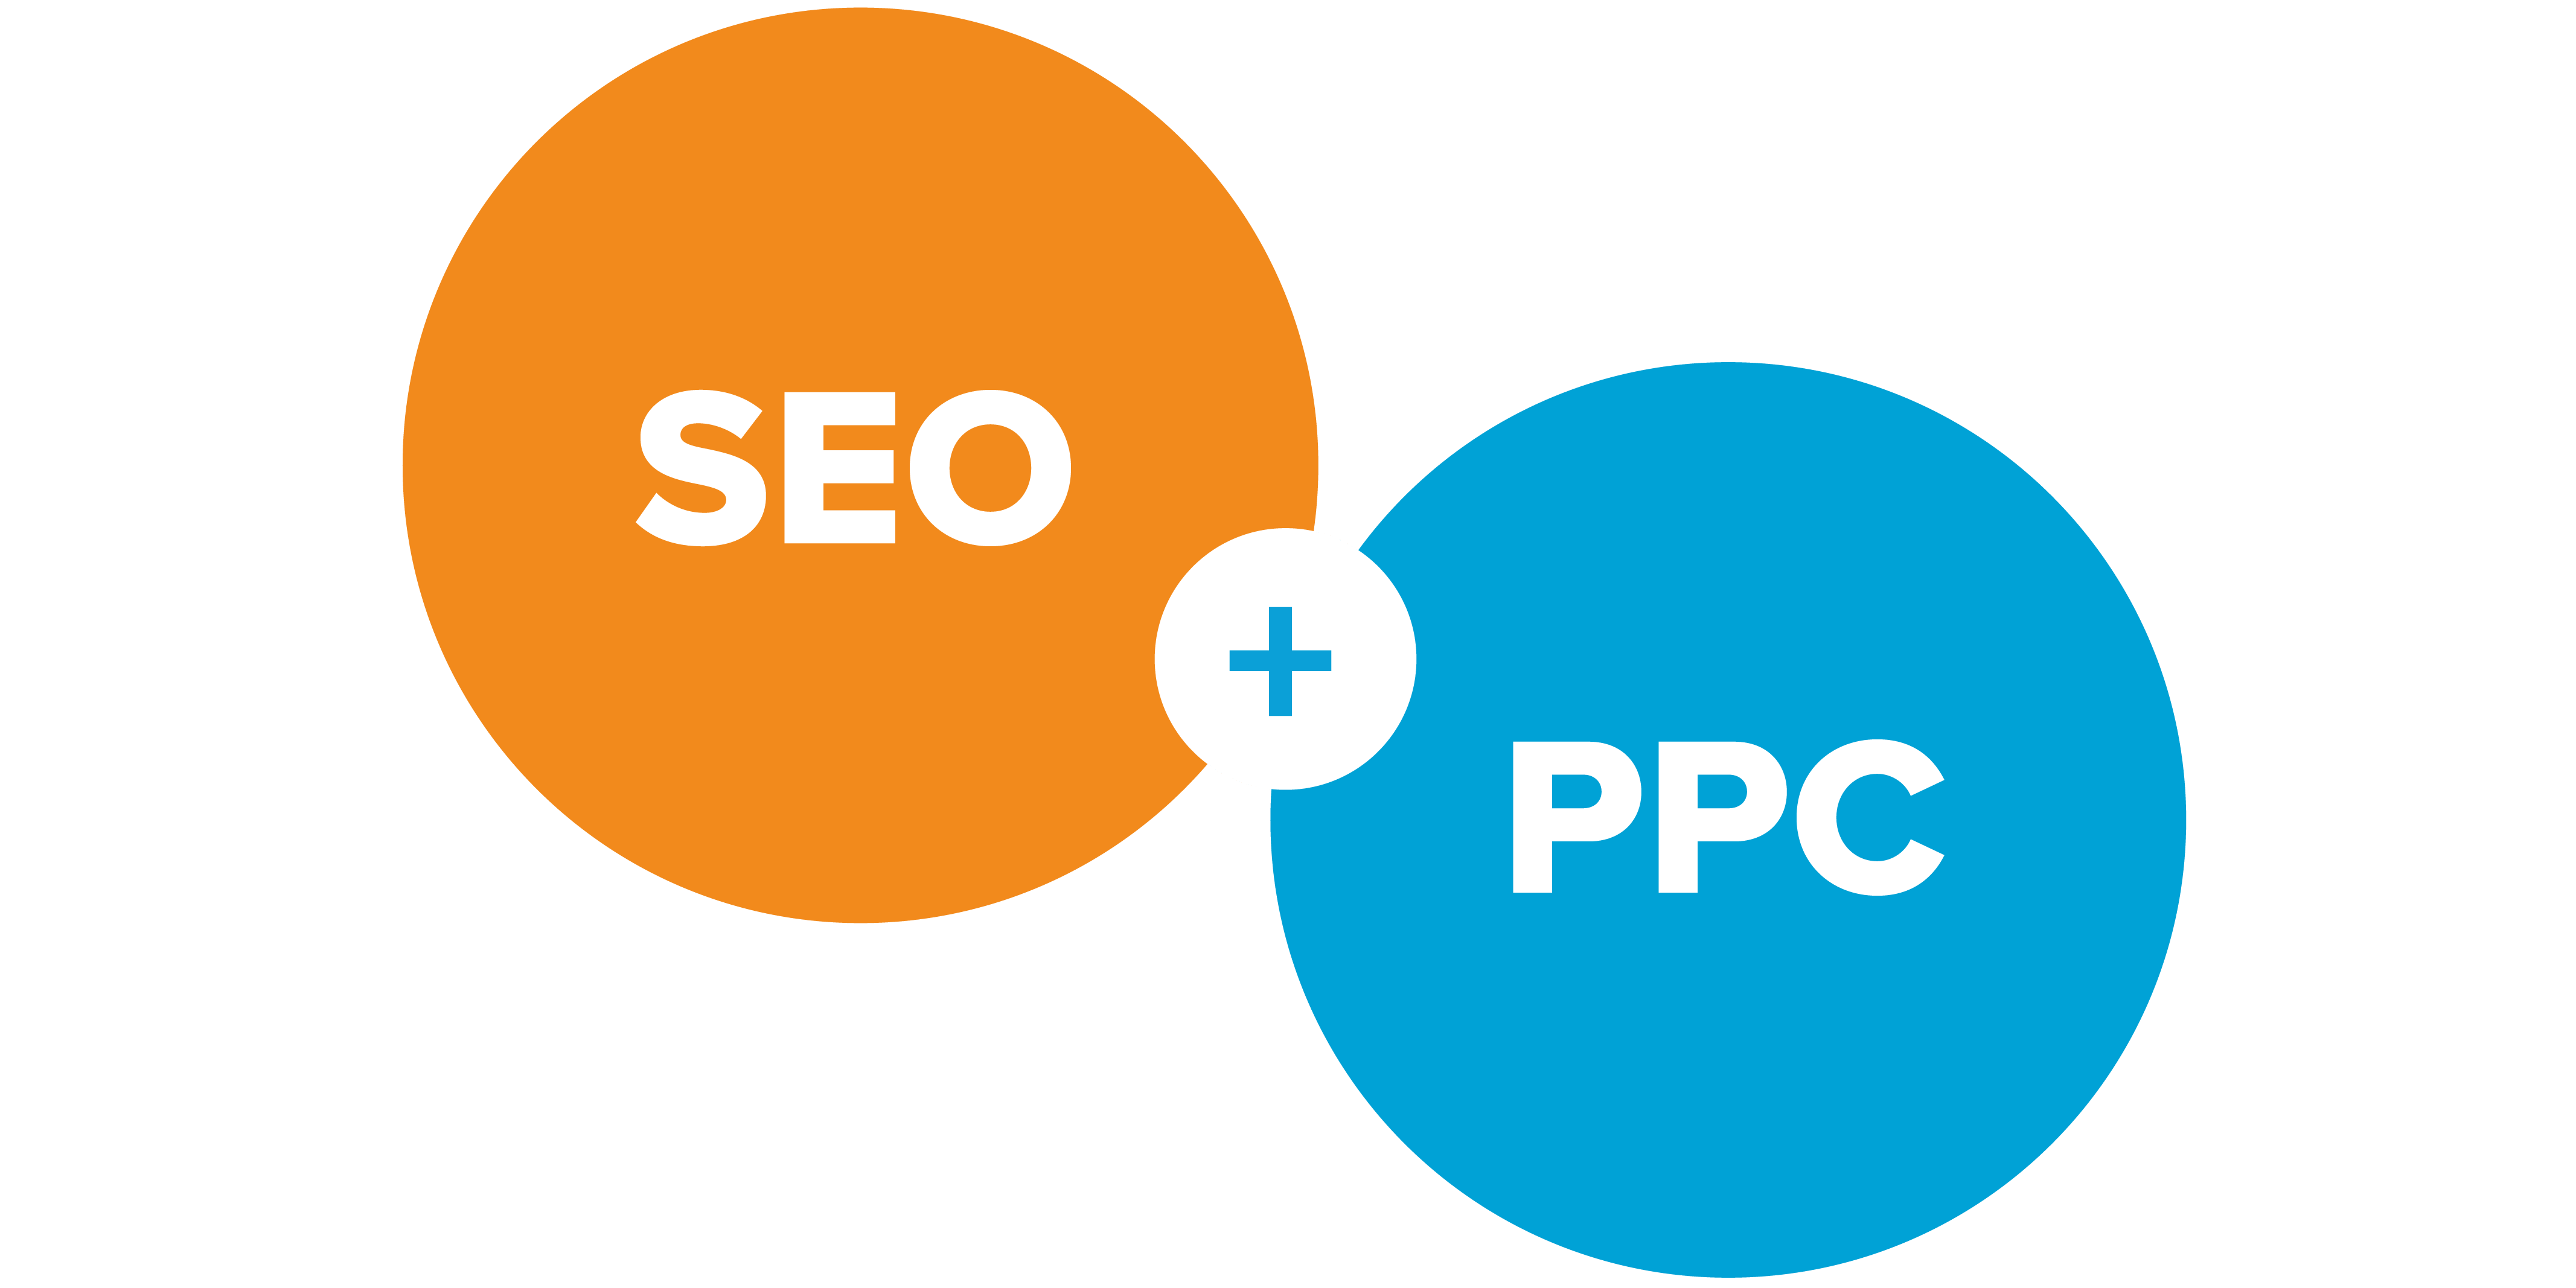 How To Make Plumbing SEO and PPC Work Together?